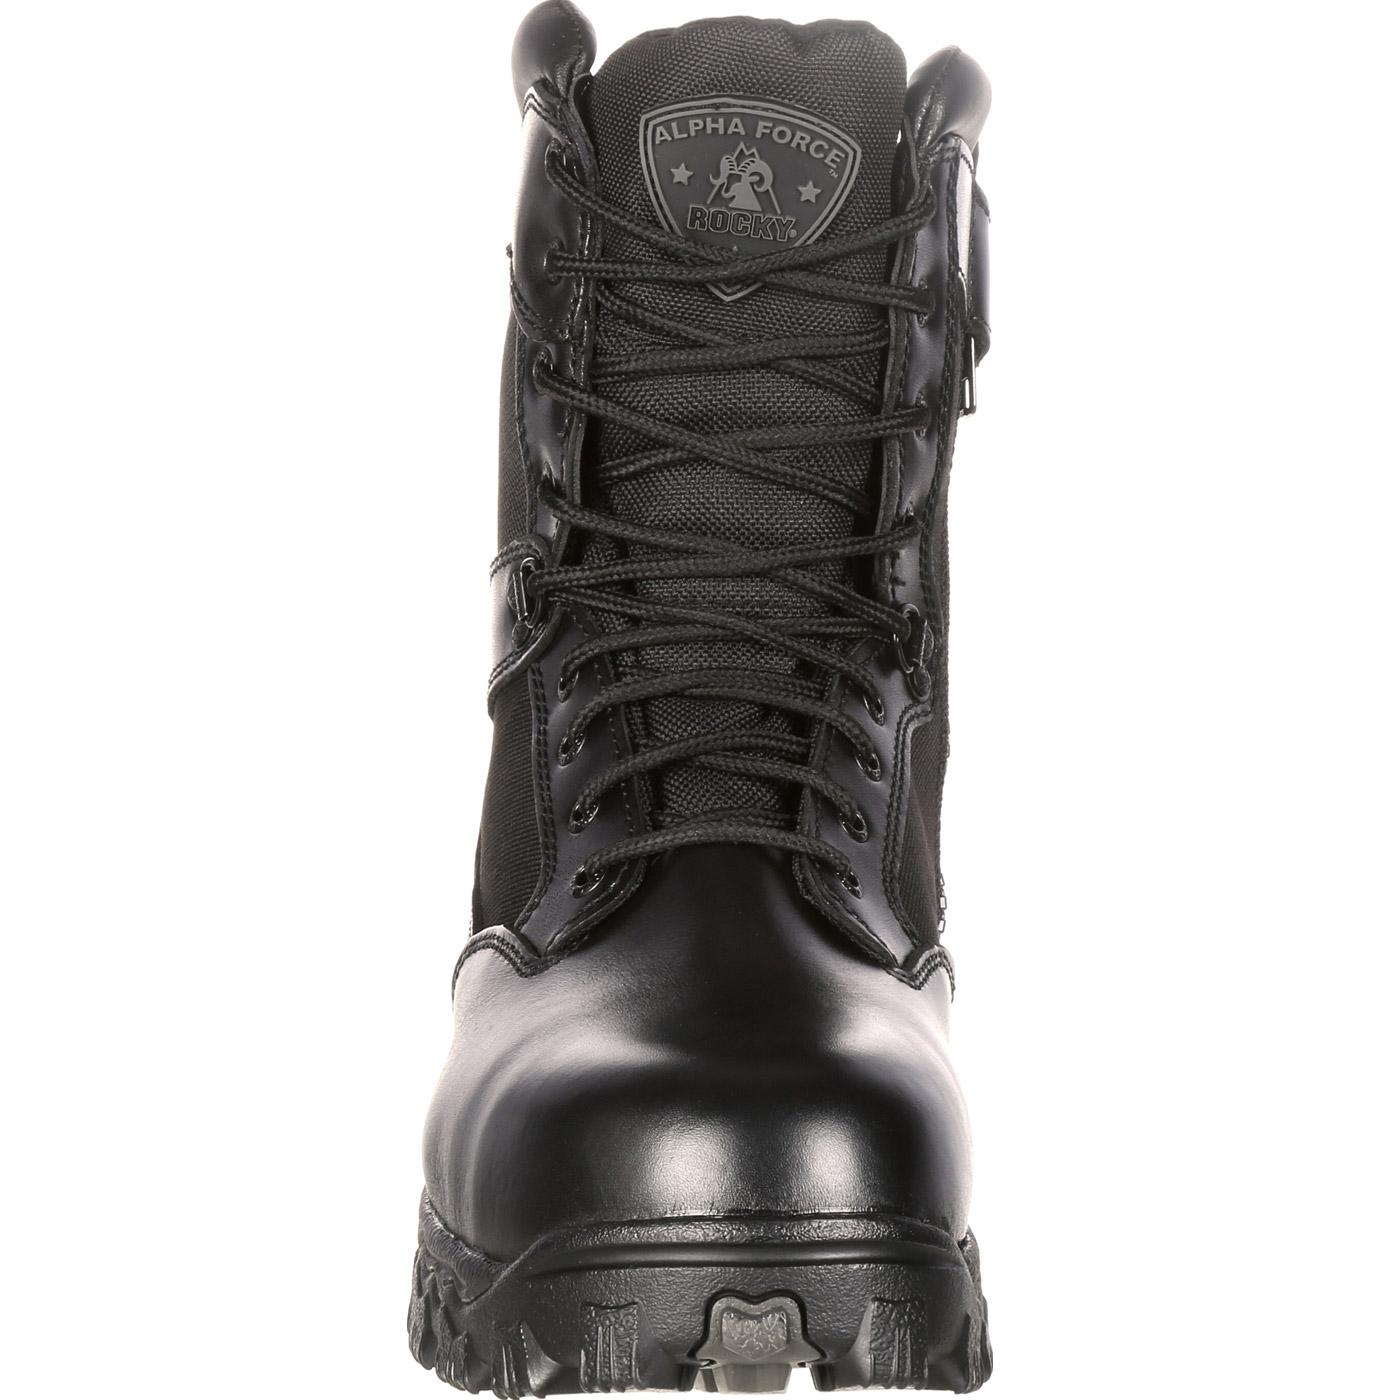 Rocky Alpha Force Waterproof 400G Insulated Public Service Boot Size 5.5(W) - image 3 of 7